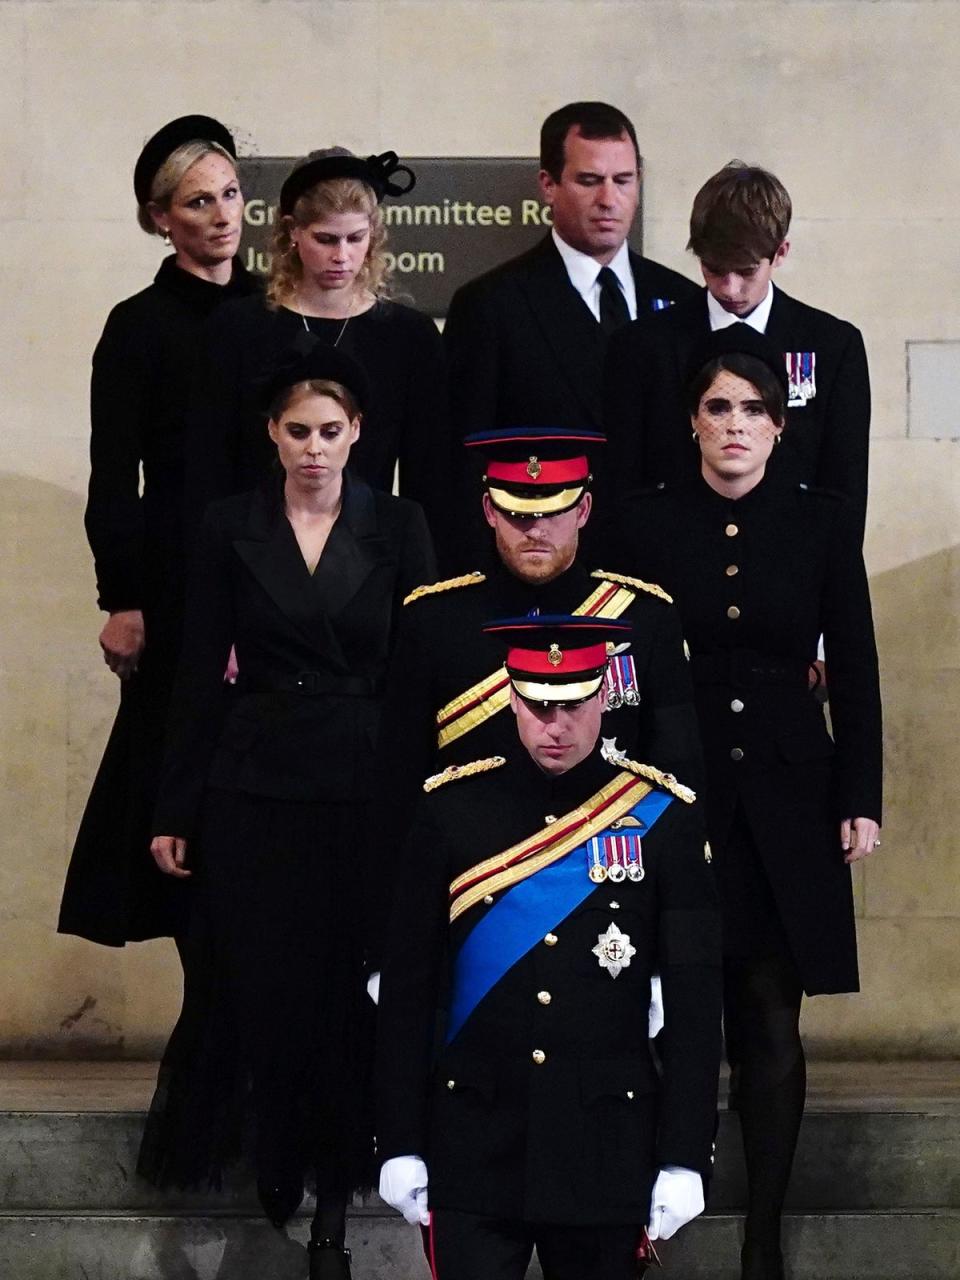 Zara Tindall, Lady Louise, Princess Beatrice, Prince William, the prince of Wales, Prince Harry, Princess Eugenie, Viscount James Severn and Peter Phillips attend the vigil of the Queen’s grandchildren around the coffin, as it lies in state on the catafalque in Westminster Hall (AP)